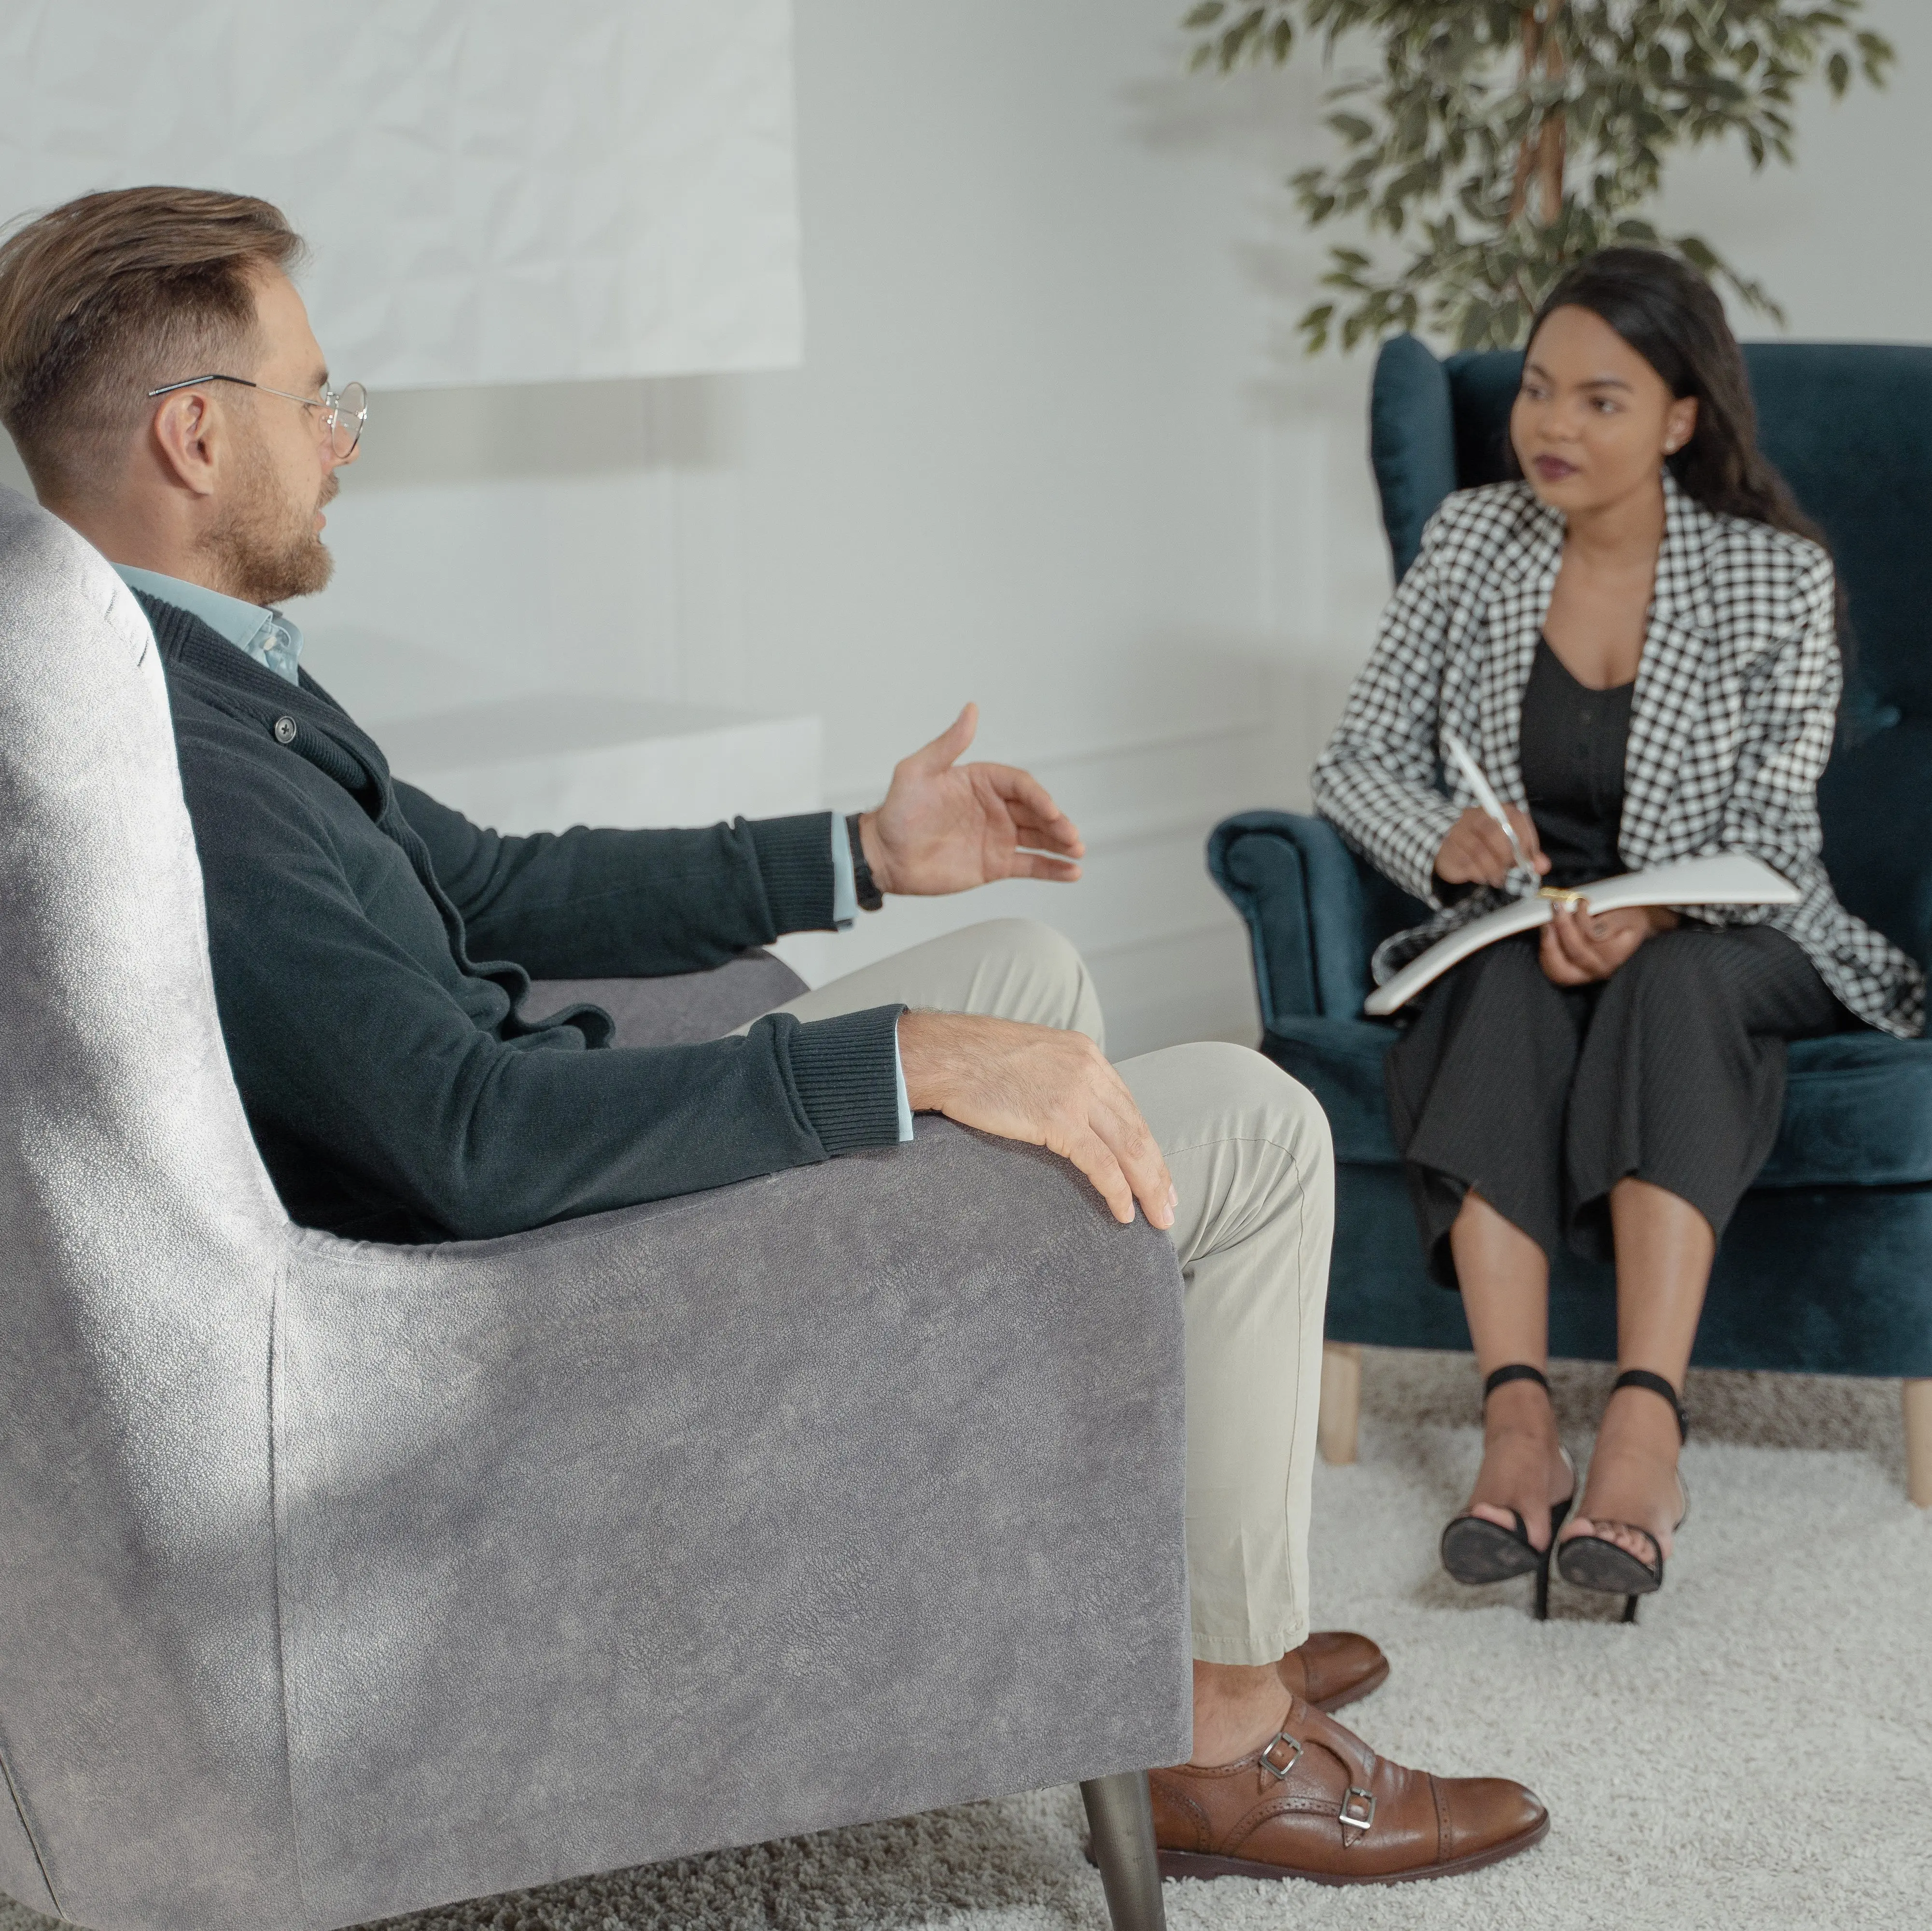 A man and a woman in business clothing sit in wingback chairs and talk.